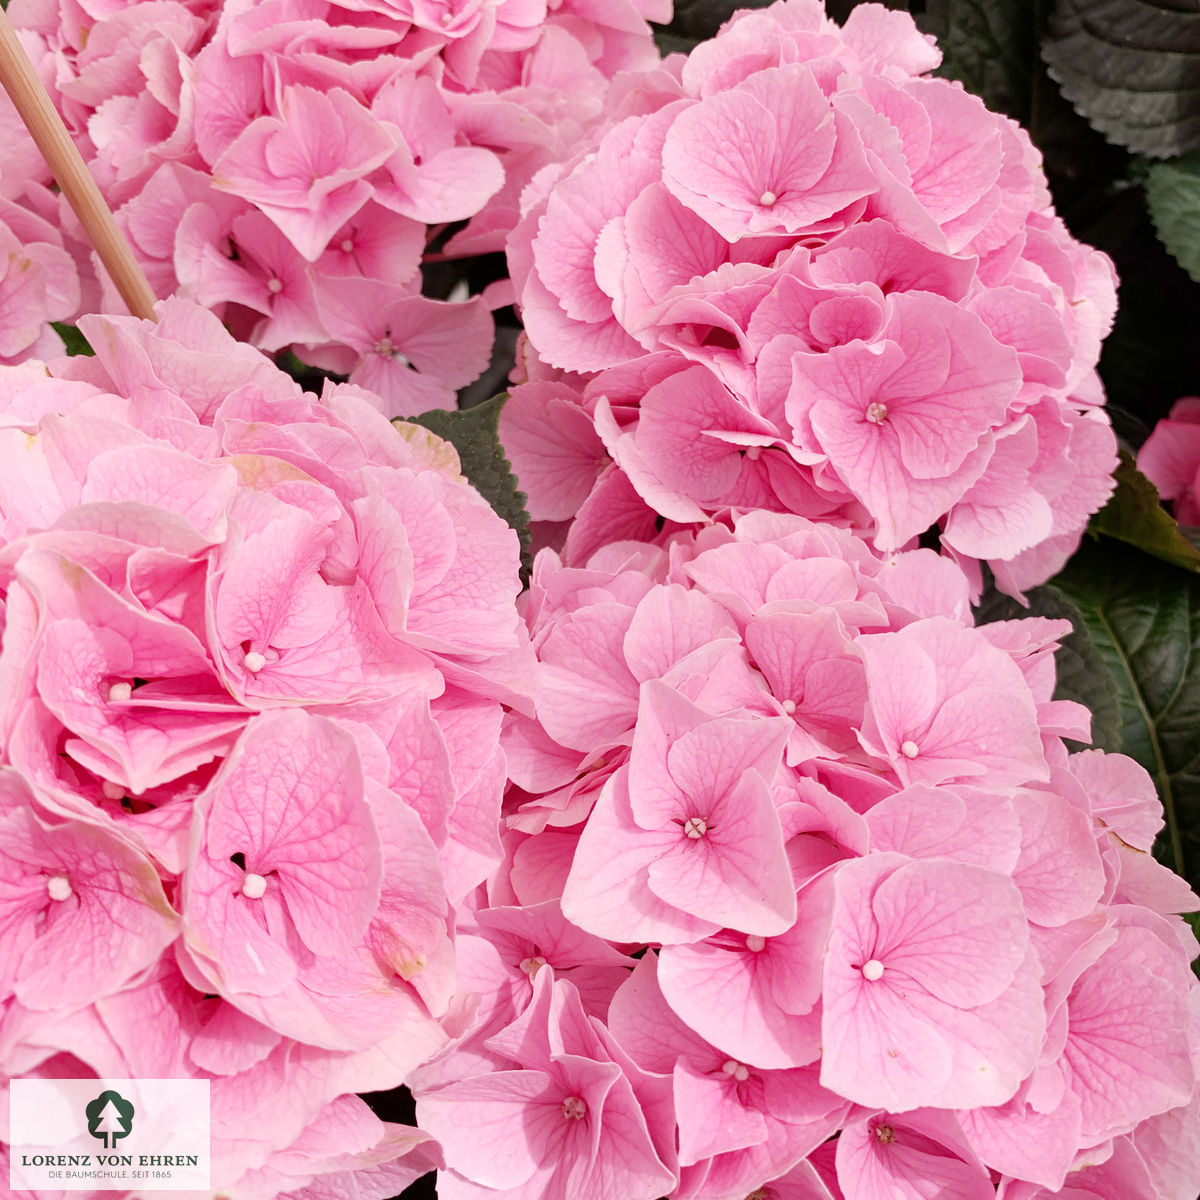 Image of Hydrangea Macrophylla Frosted Pink